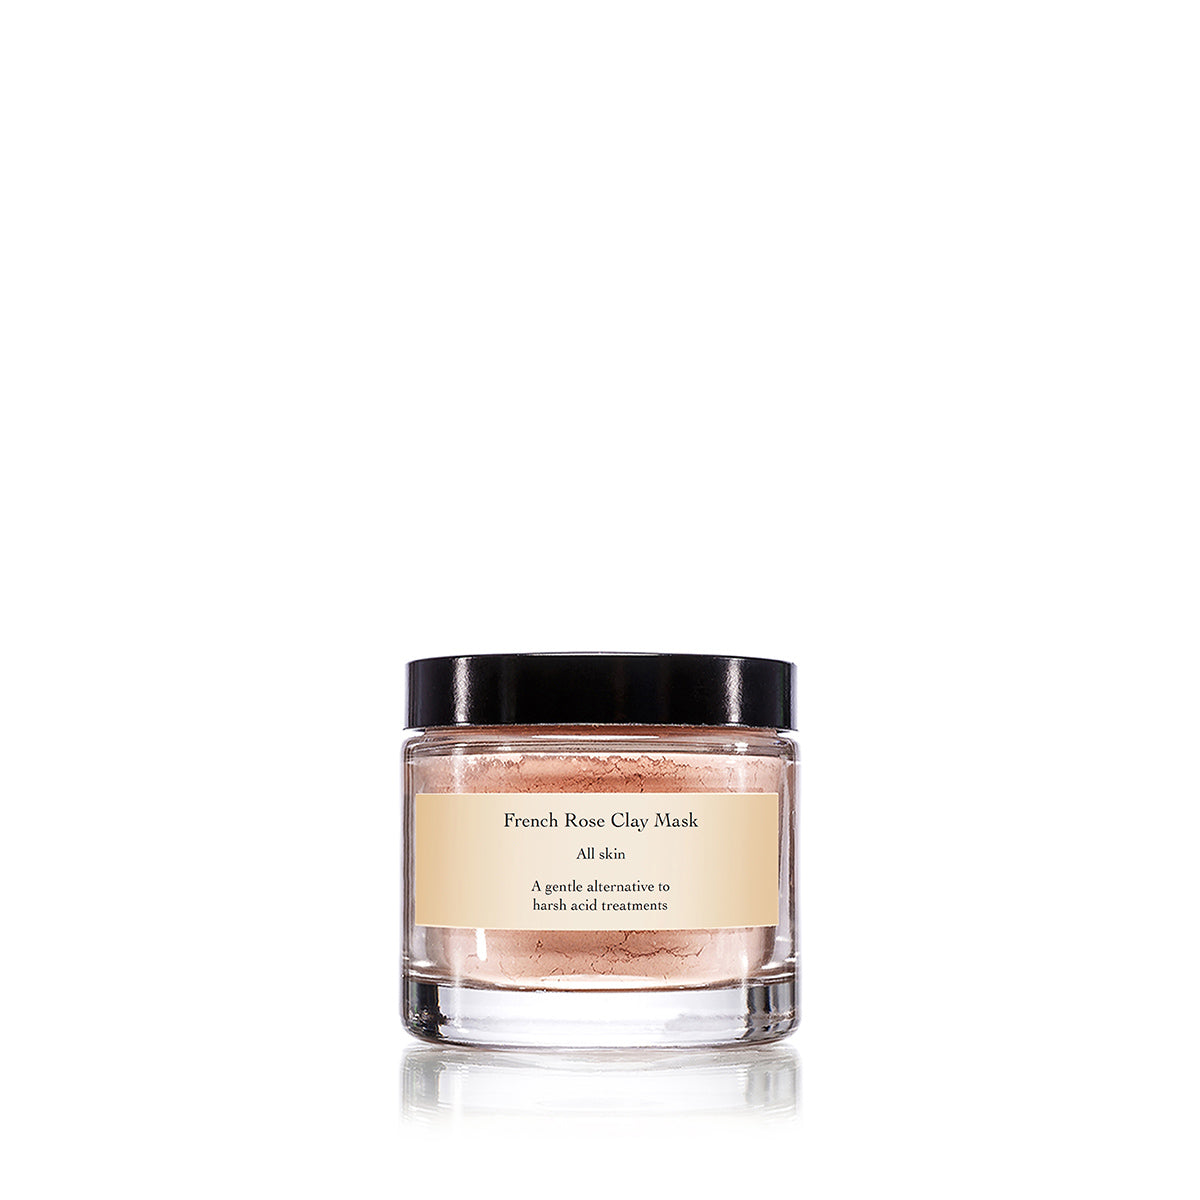 evanhealy french rose clay mask product in glass jar